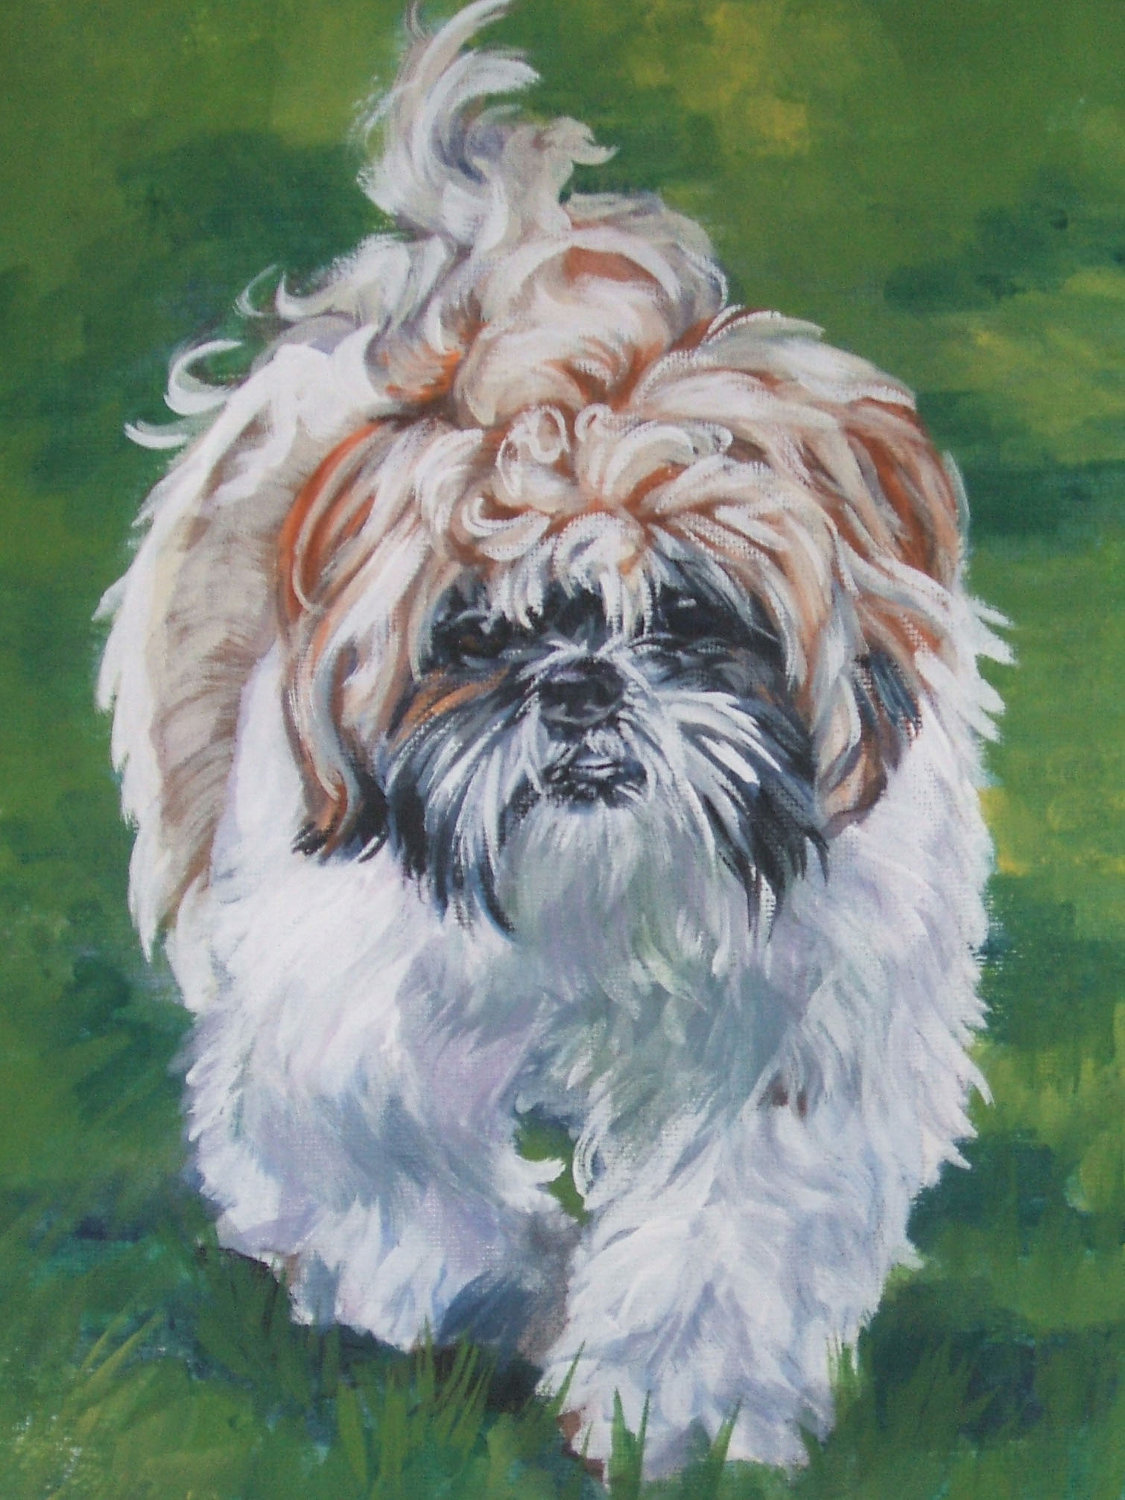 Shih Tzu photos and wallpapers. The beautiful Shih Tzu pictures